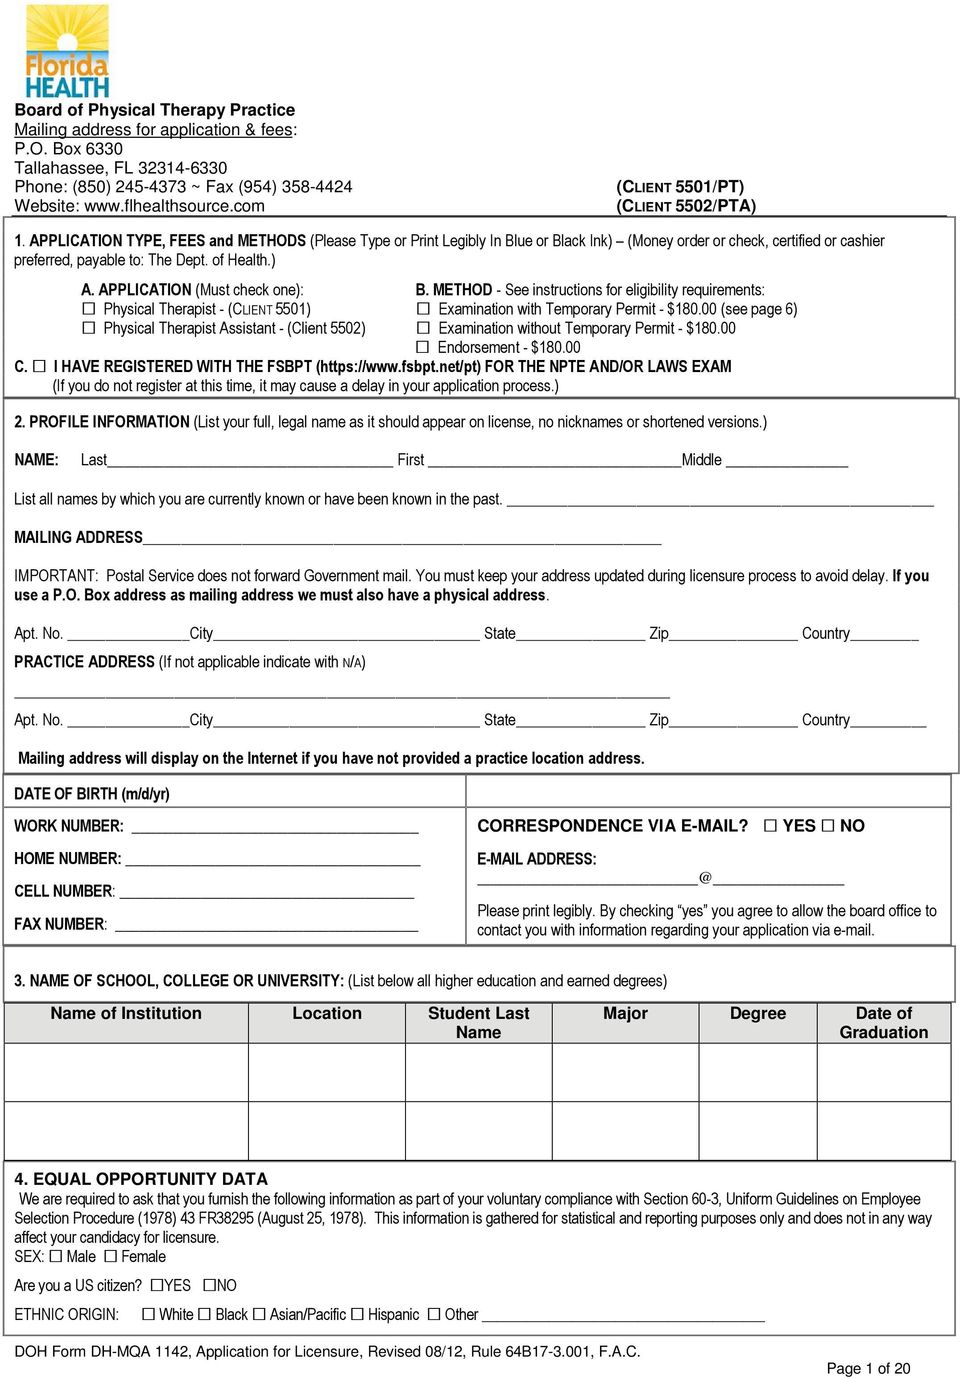 APPLICATION TYPE, FEES and METHODS (Please Type or Print Legibly In Blue or Black Ink) (Money order or check, certified or cashier preferred, payable to: The Dept. of Health.) A.